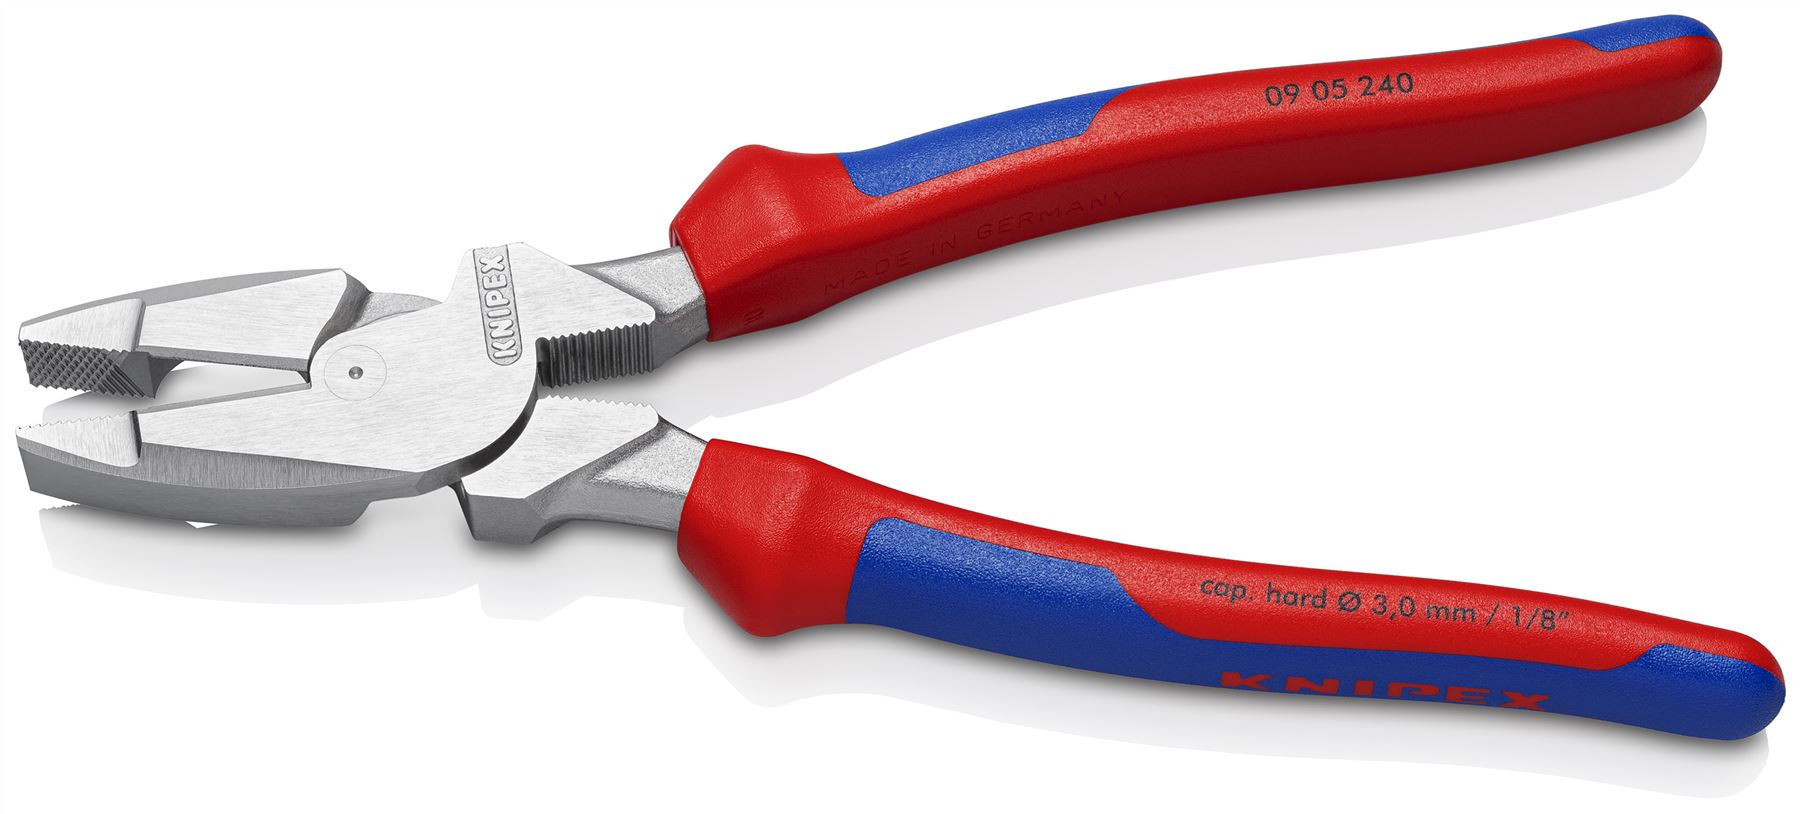 Knipex Linemans Pliers American Style 240mm Multi Component Grips Chrome Plated 09 05 240